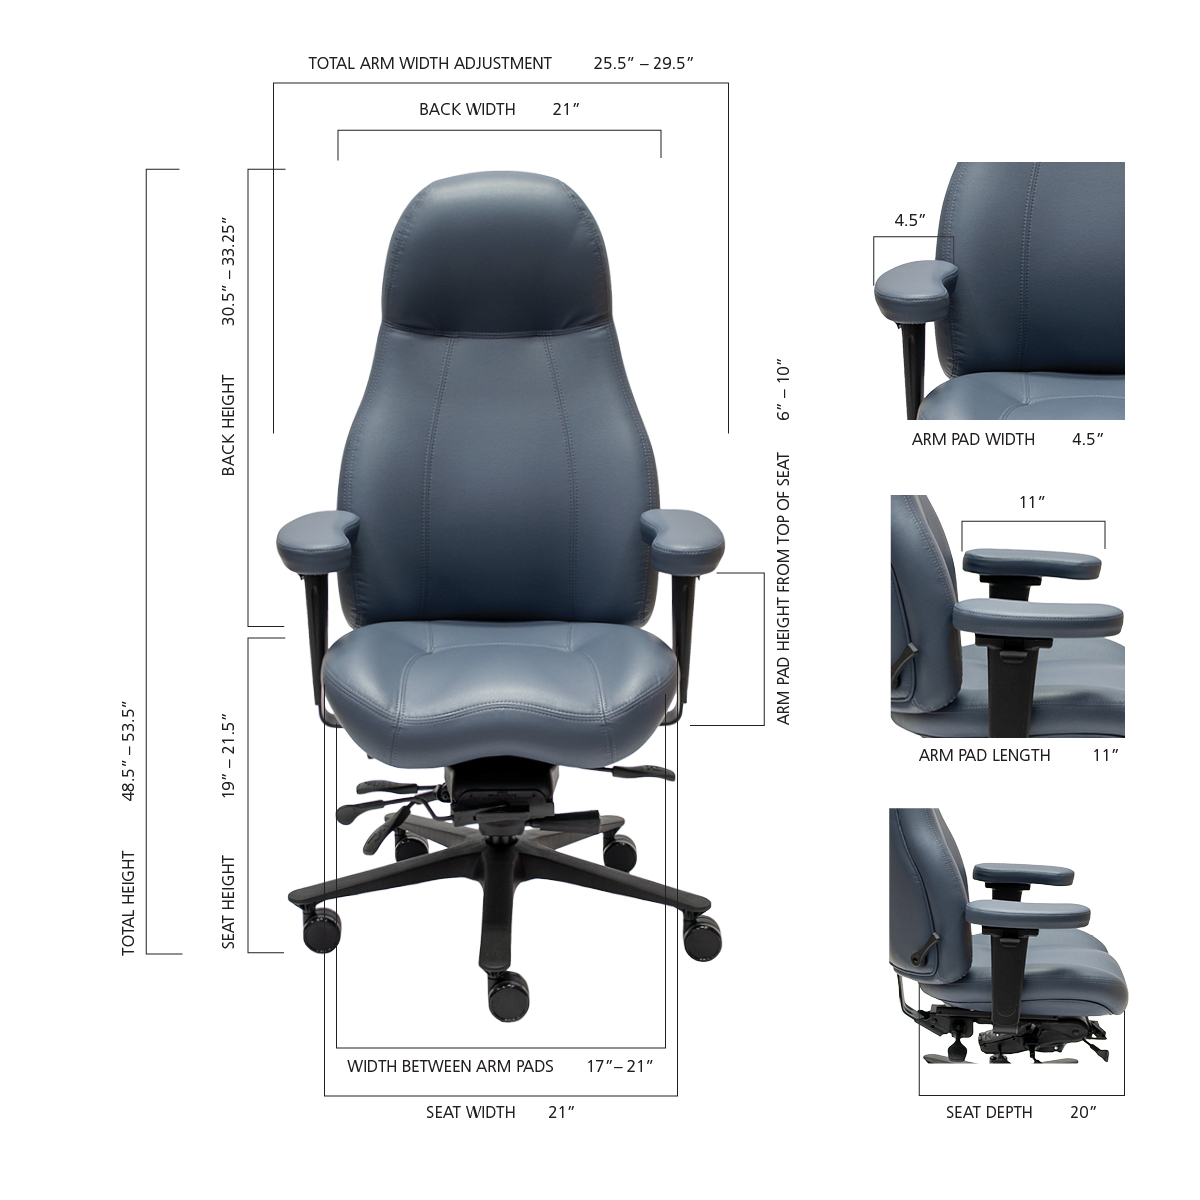 Ultimate Executive High Back Ergonomic Office Chair 2390 The Best Ergonomic Office Chairs For Your Comfort Lifeform Chairs